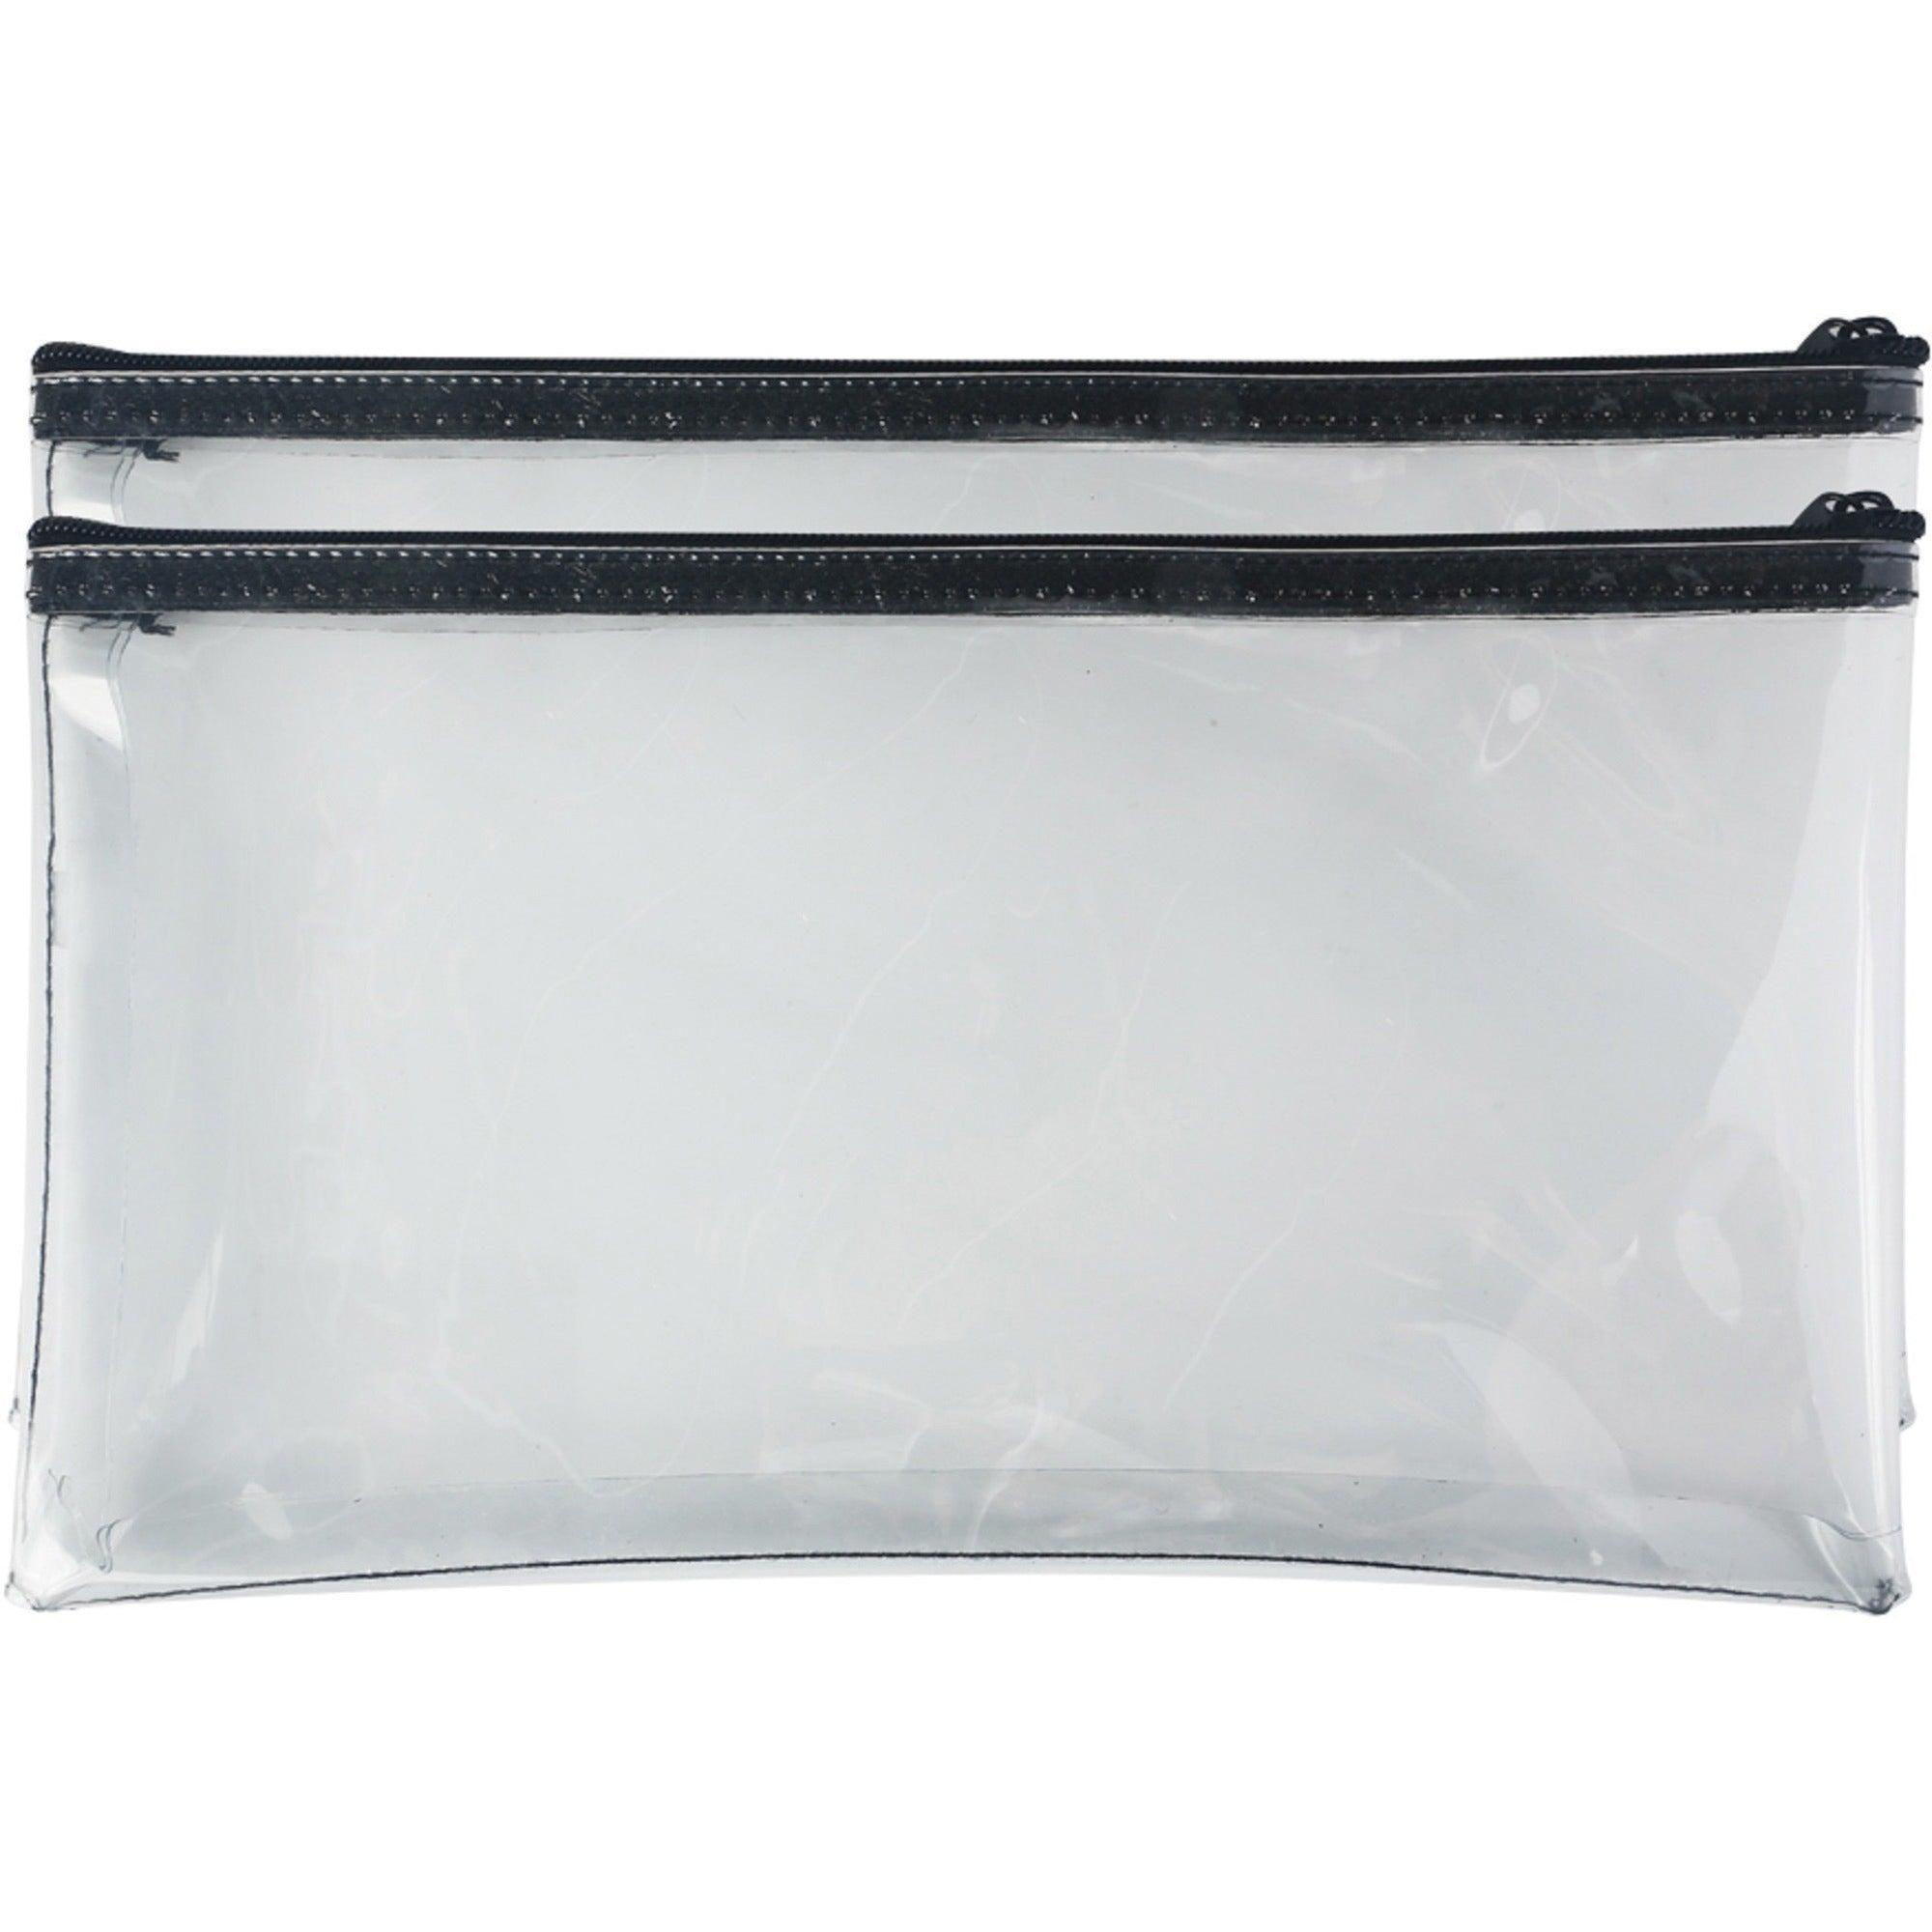 sparco-wallet-bag-6-width-x-11-length-zipper-closure-clear-2-pack-currency-check-paperwork_spr02867 - 1